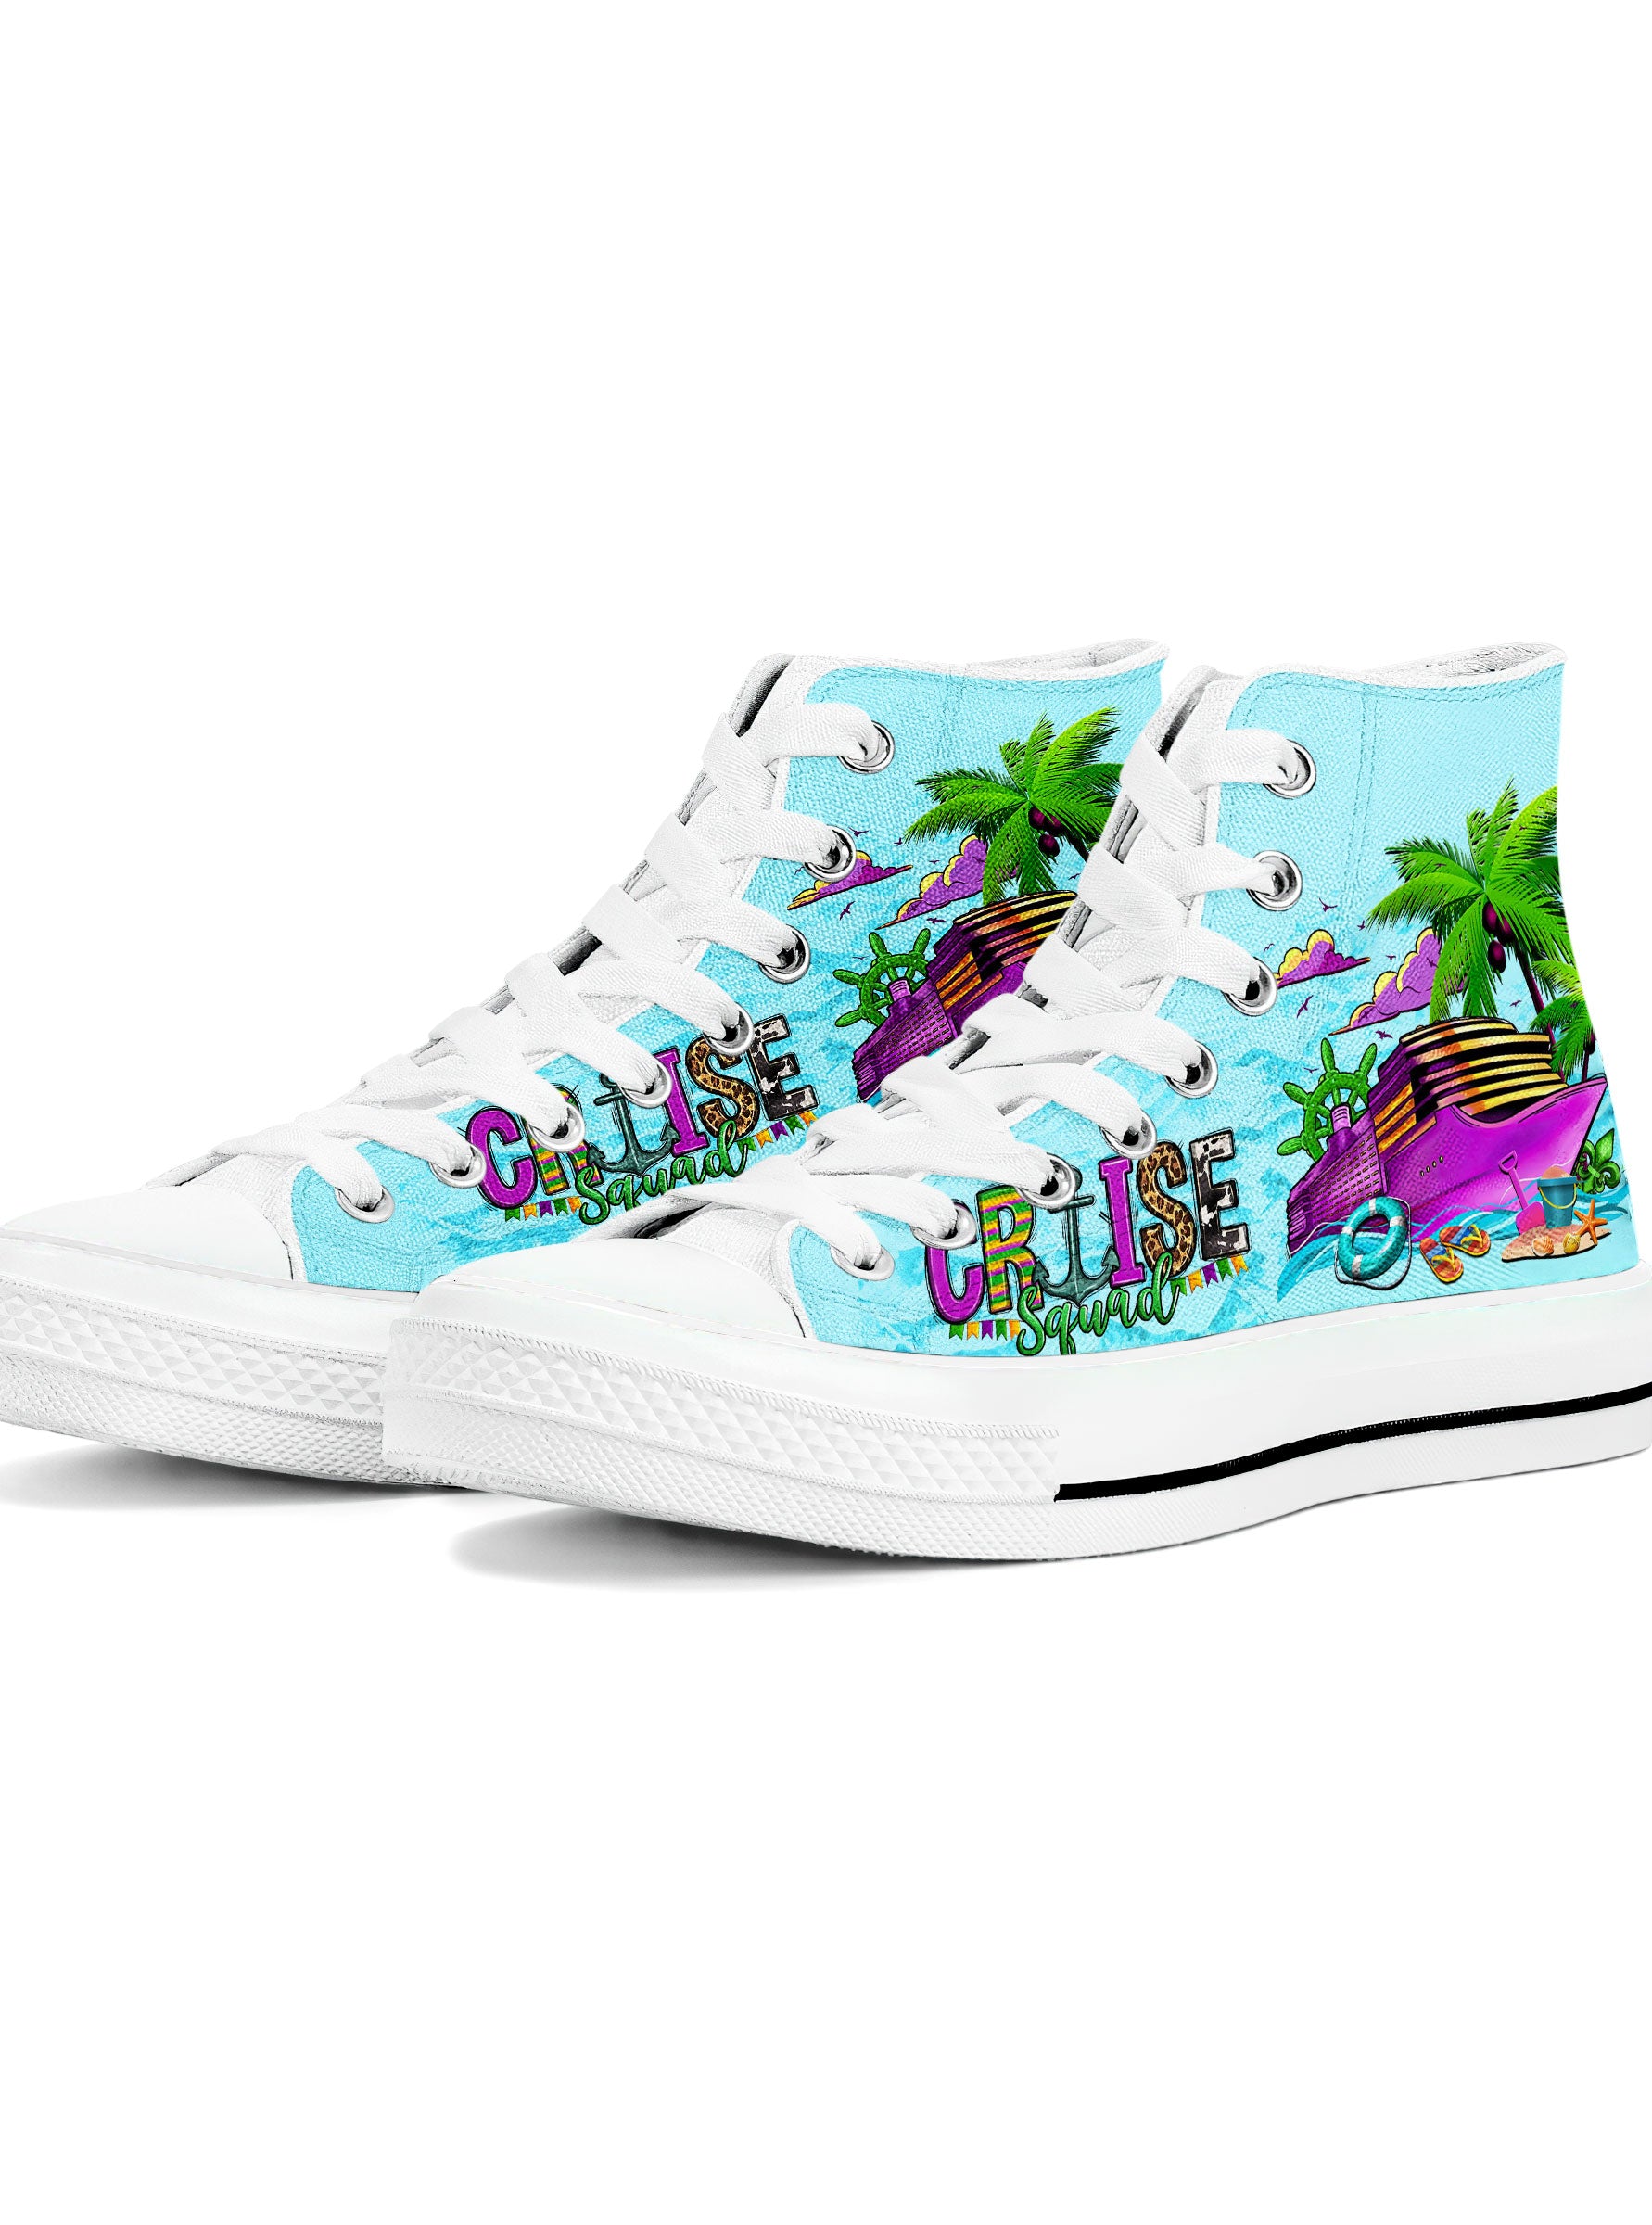 CRUISE SQUAD HIGH TOP CANVAS SHOES - TLTR0607232